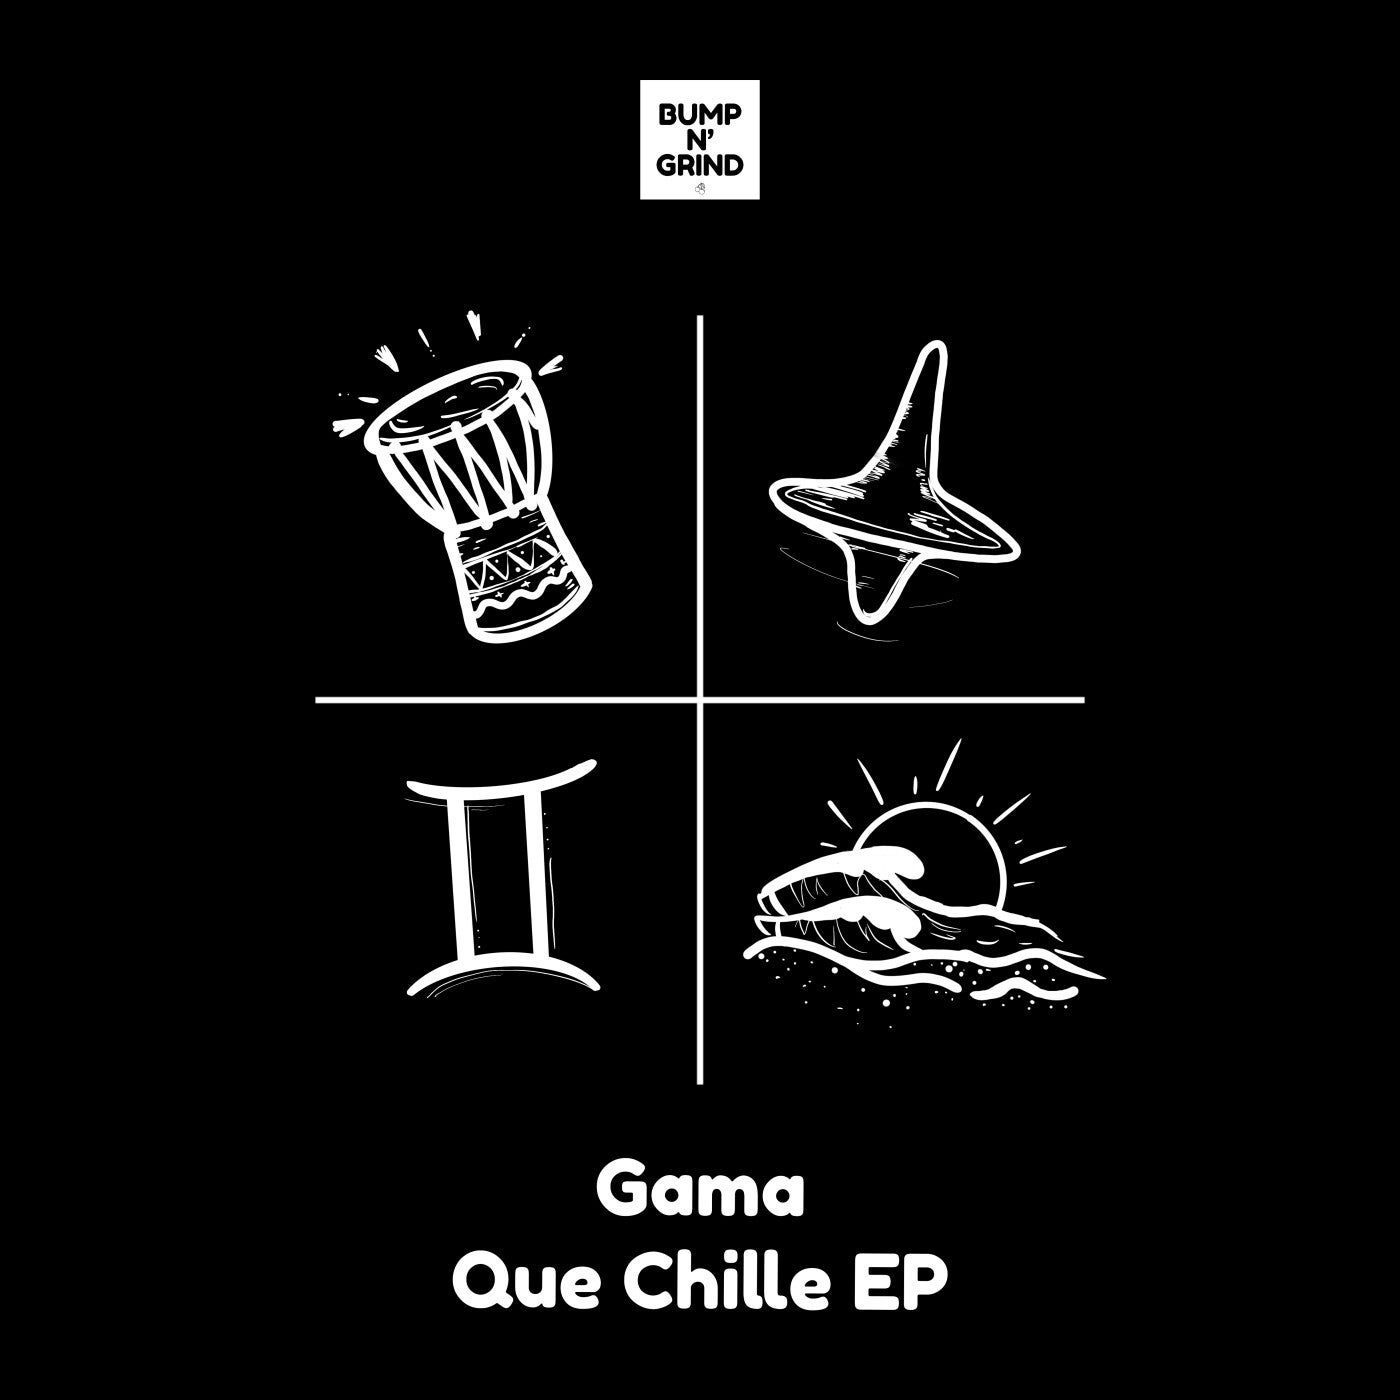 Que Chille EP